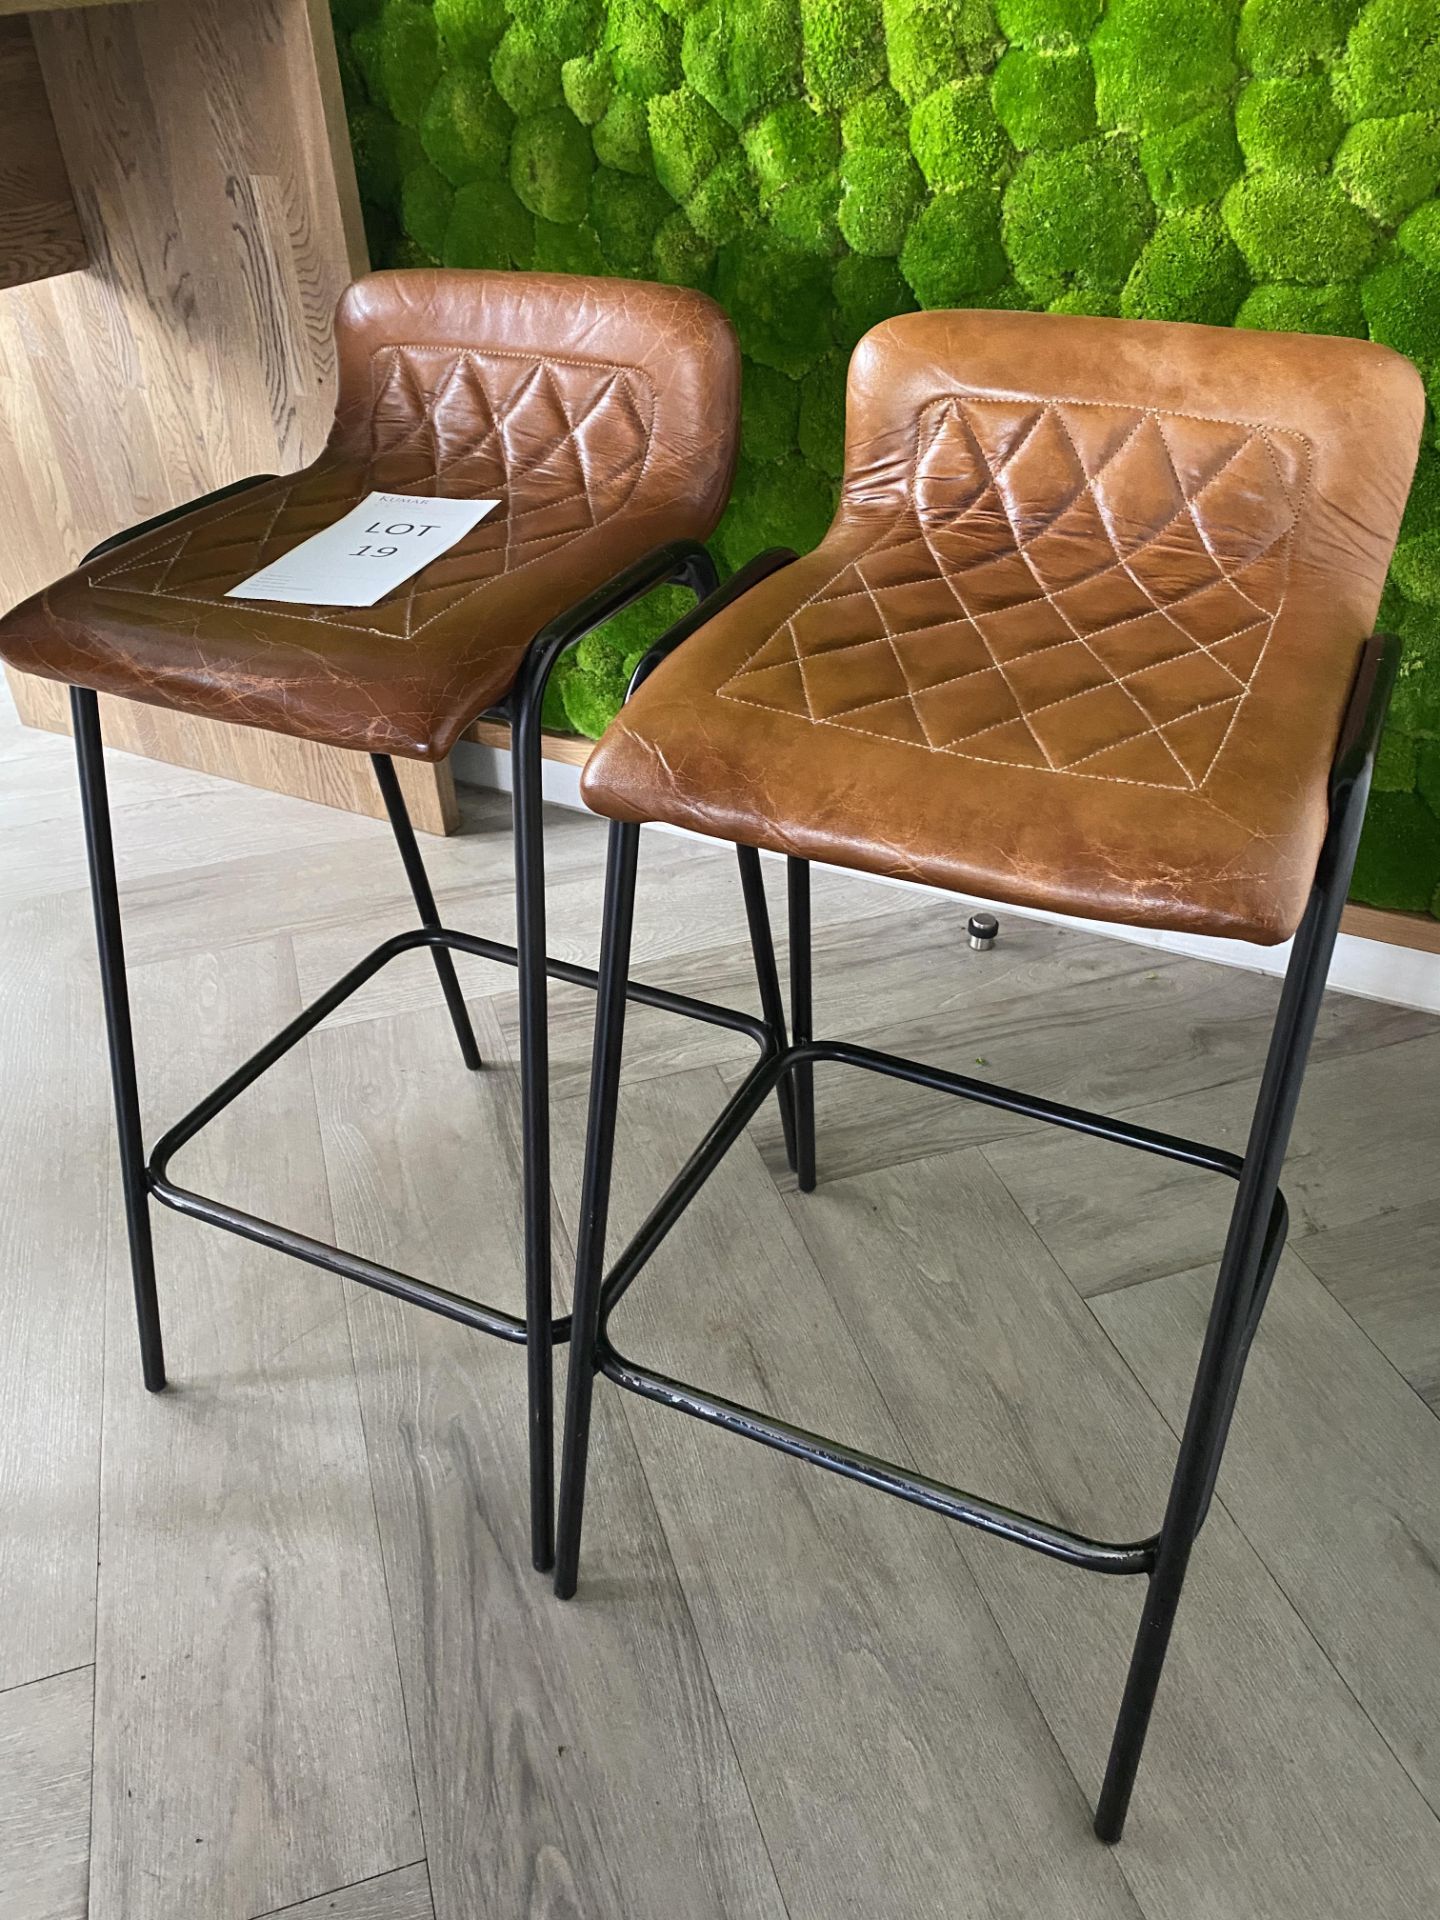 2x Leather Upholstered Bar Stools - New Cost £120 per stool